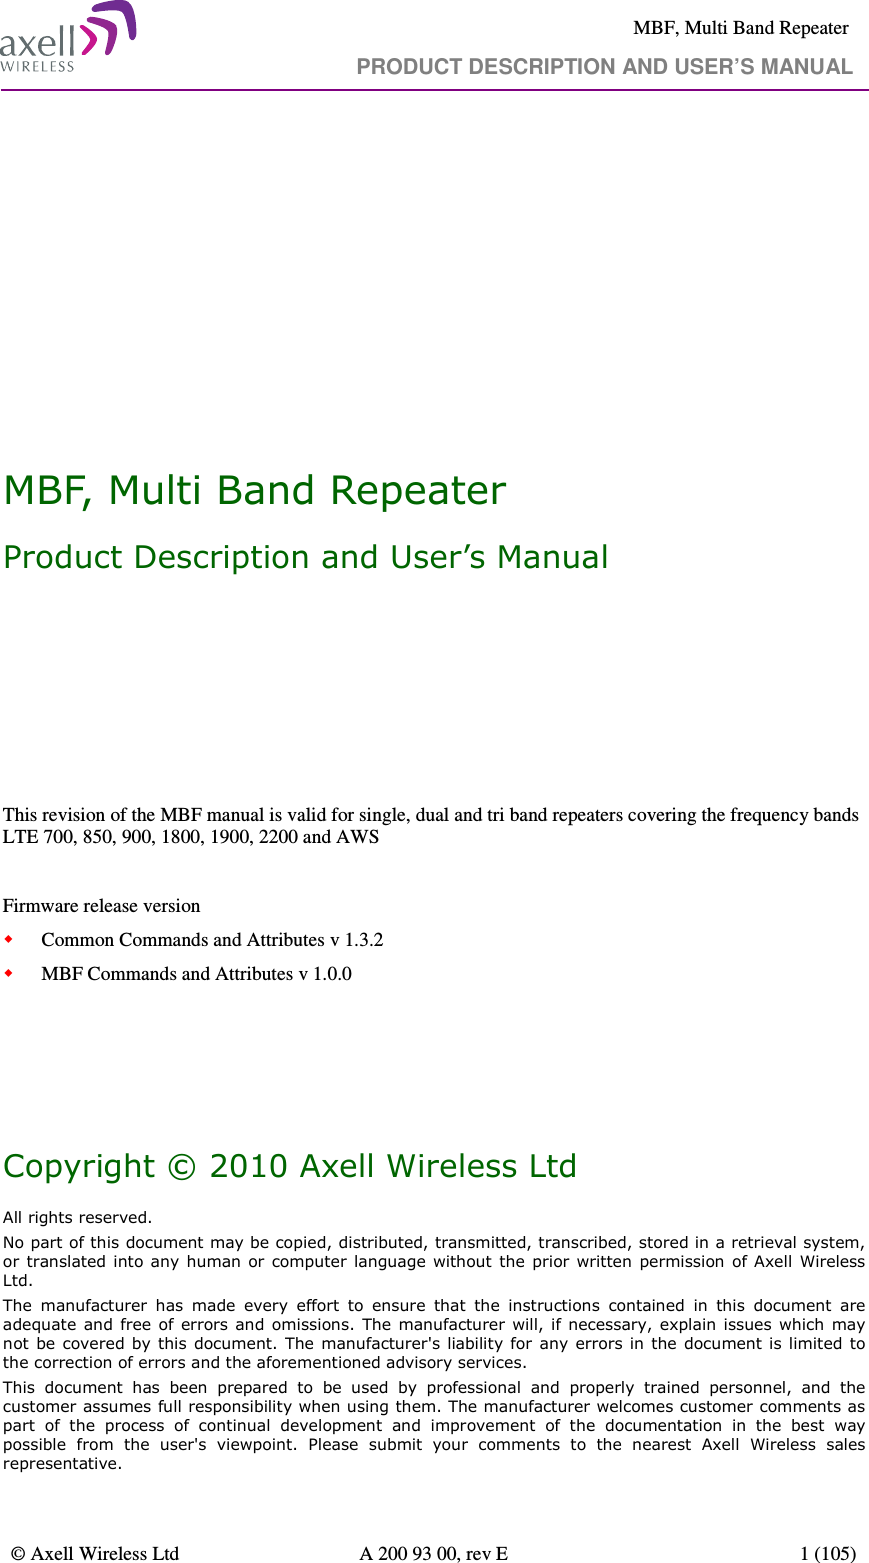     MBF, Multi Band Repeater                                                            PRODUCT DESCRIPTION AND USER’S MANUAL   © Axell Wireless Ltd  A 200 93 00, rev E  1 (105)          MBF, Multi Band Repeater Product Description and User’s Manual       This revision of the MBF manual is valid for single, dual and tri band repeaters covering the frequency bands LTE 700, 850, 900, 1800, 1900, 2200 and AWS  Firmware release version  Common Commands and Attributes v 1.3.2  MBF Commands and Attributes v 1.0.0     Copyright © 2010 Axell Wireless Ltd All rights reserved. No part of this document may be copied, distributed, transmitted, transcribed, stored in a retrieval system, or translated into any human or computer language without  the  prior written permission  of Axell  Wireless Ltd. The  manufacturer  has  made  every  effort  to  ensure  that  the  instructions  contained  in  this  document  are adequate and  free  of  errors  and  omissions.  The  manufacturer will, if necessary, explain issues which  may not  be covered by this document. The manufacturer&apos;s liability for any errors in  the  document is limited to the correction of errors and the aforementioned advisory services. This  document  has  been  prepared  to  be  used  by  professional  and  properly  trained  personnel,  and  the customer assumes full responsibility when using them. The manufacturer welcomes customer comments as part  of  the  process  of  continual  development  and  improvement  of  the  documentation  in  the  best  way possible  from  the  user&apos;s  viewpoint.  Please  submit  your  comments  to  the  nearest  Axell  Wireless  sales representative. 